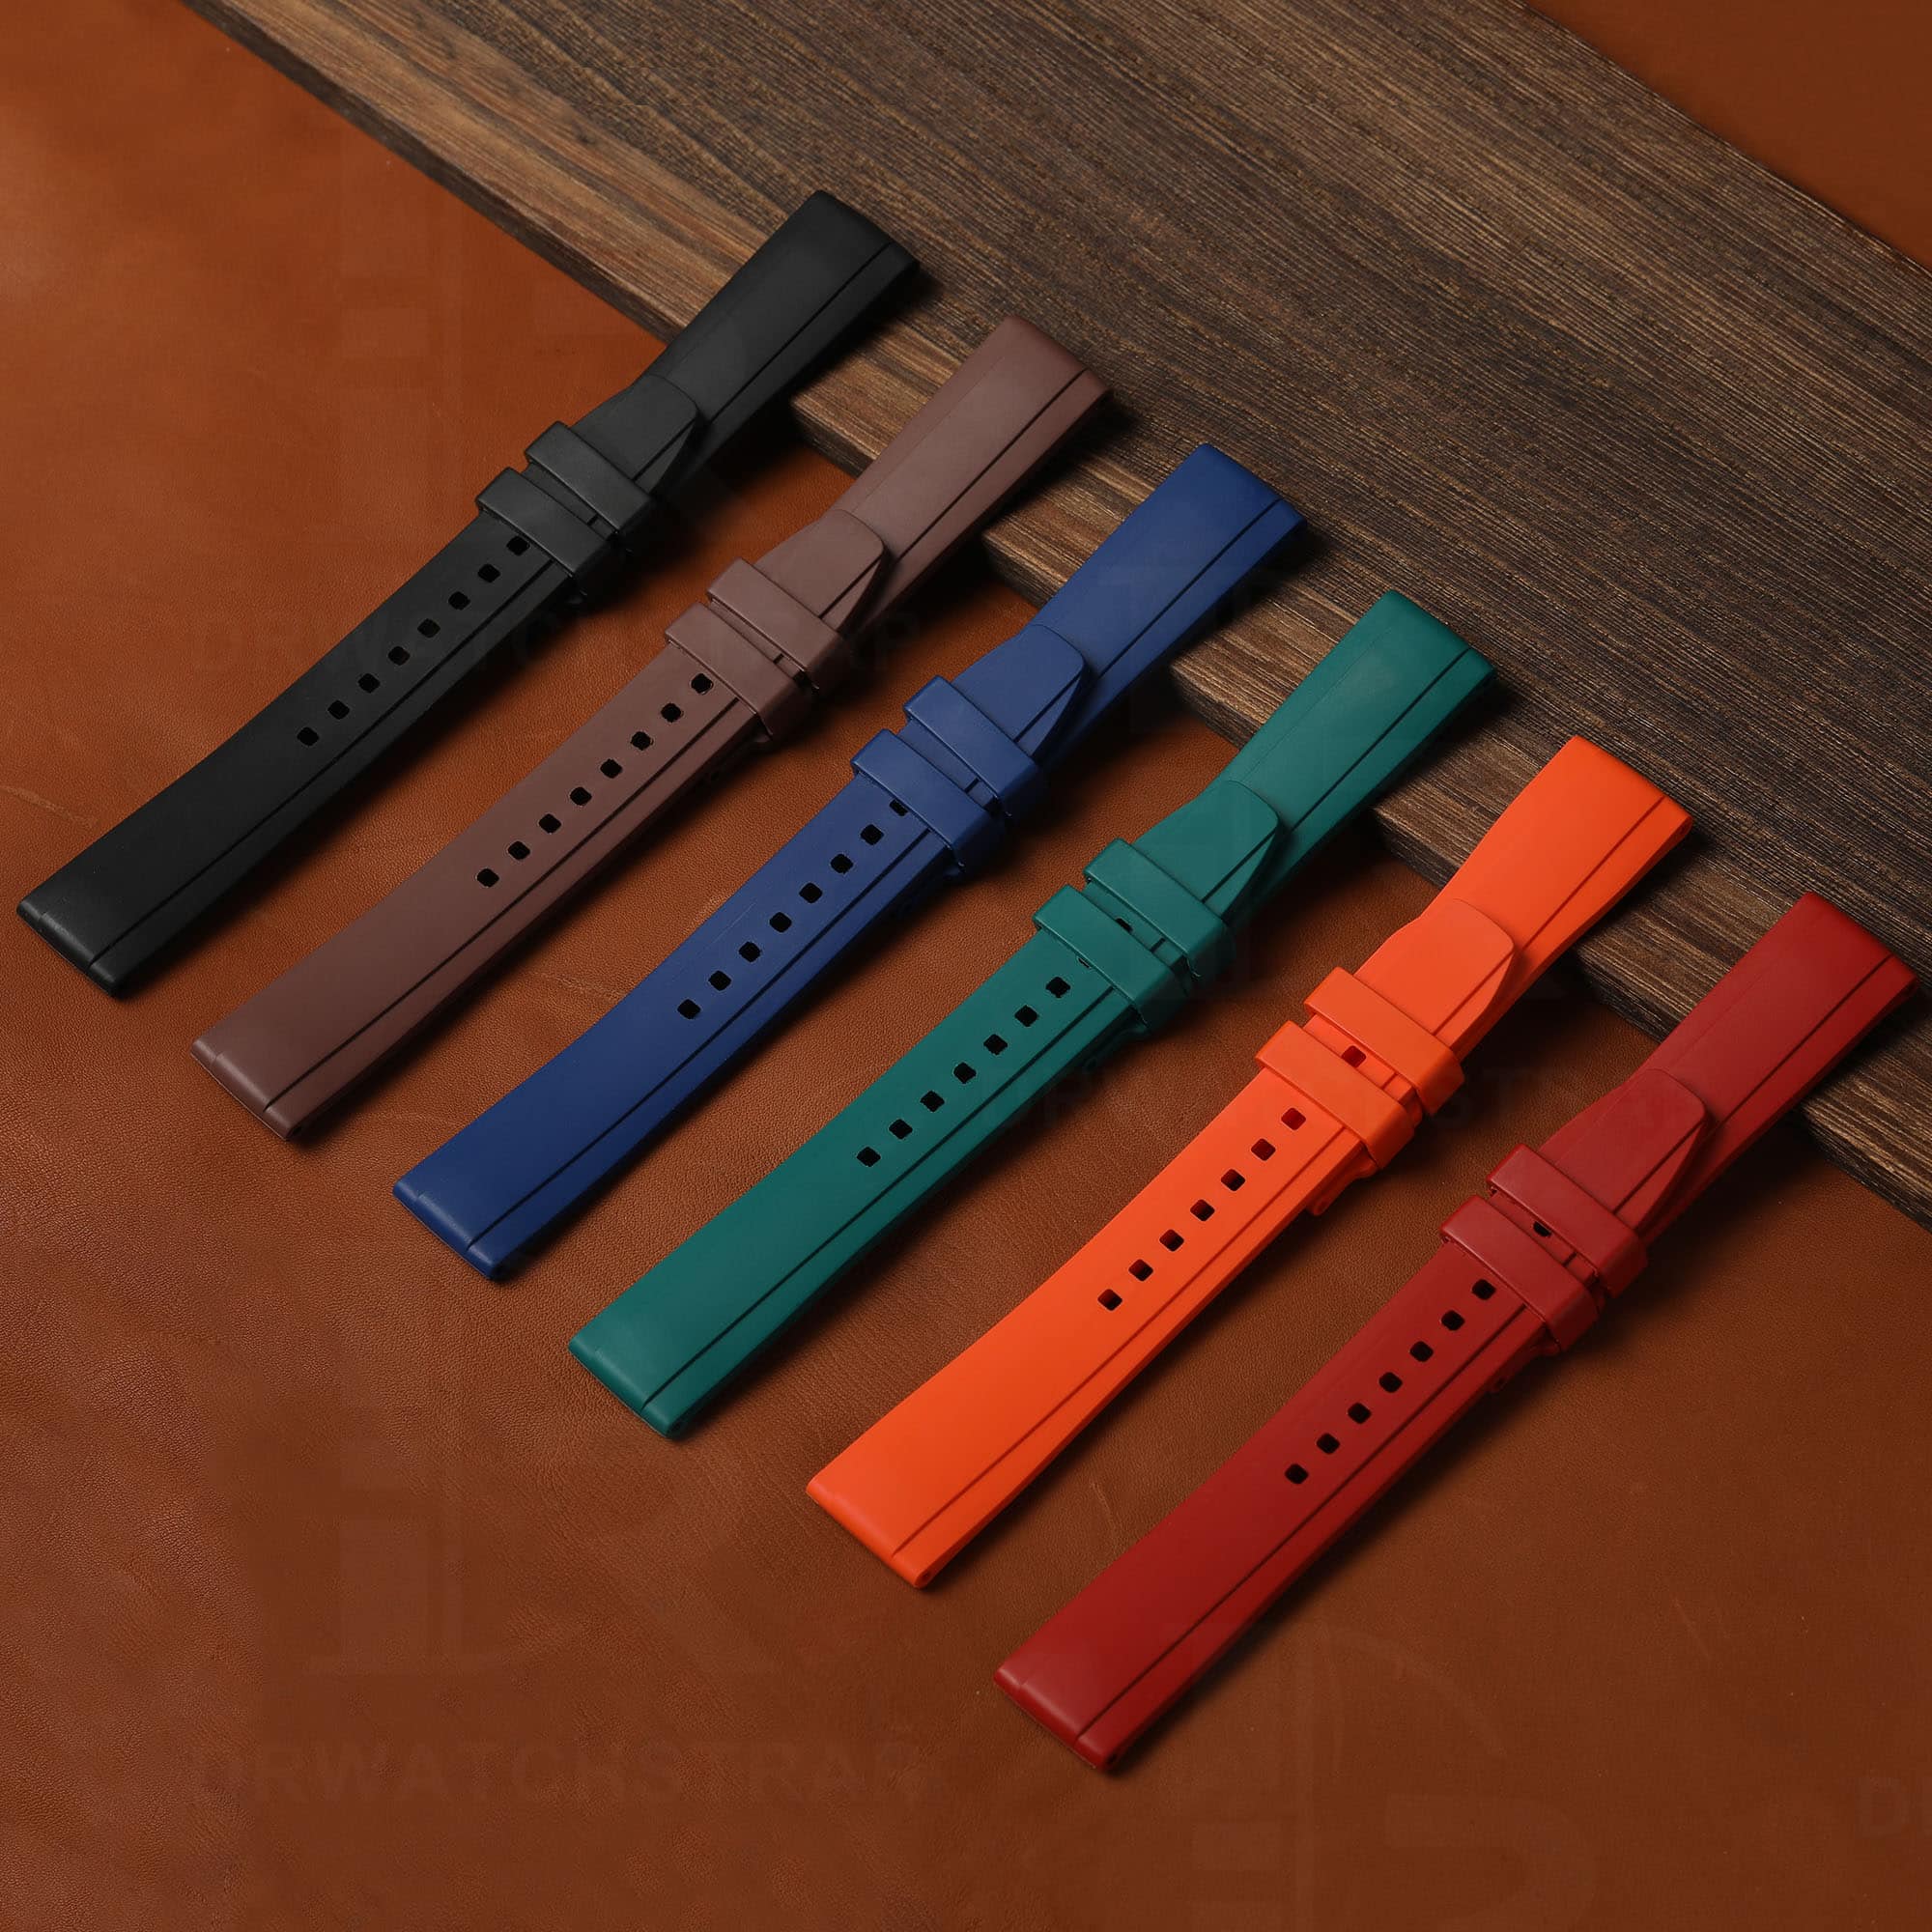 Silicone rubber watch straps made of the best quality rubber material